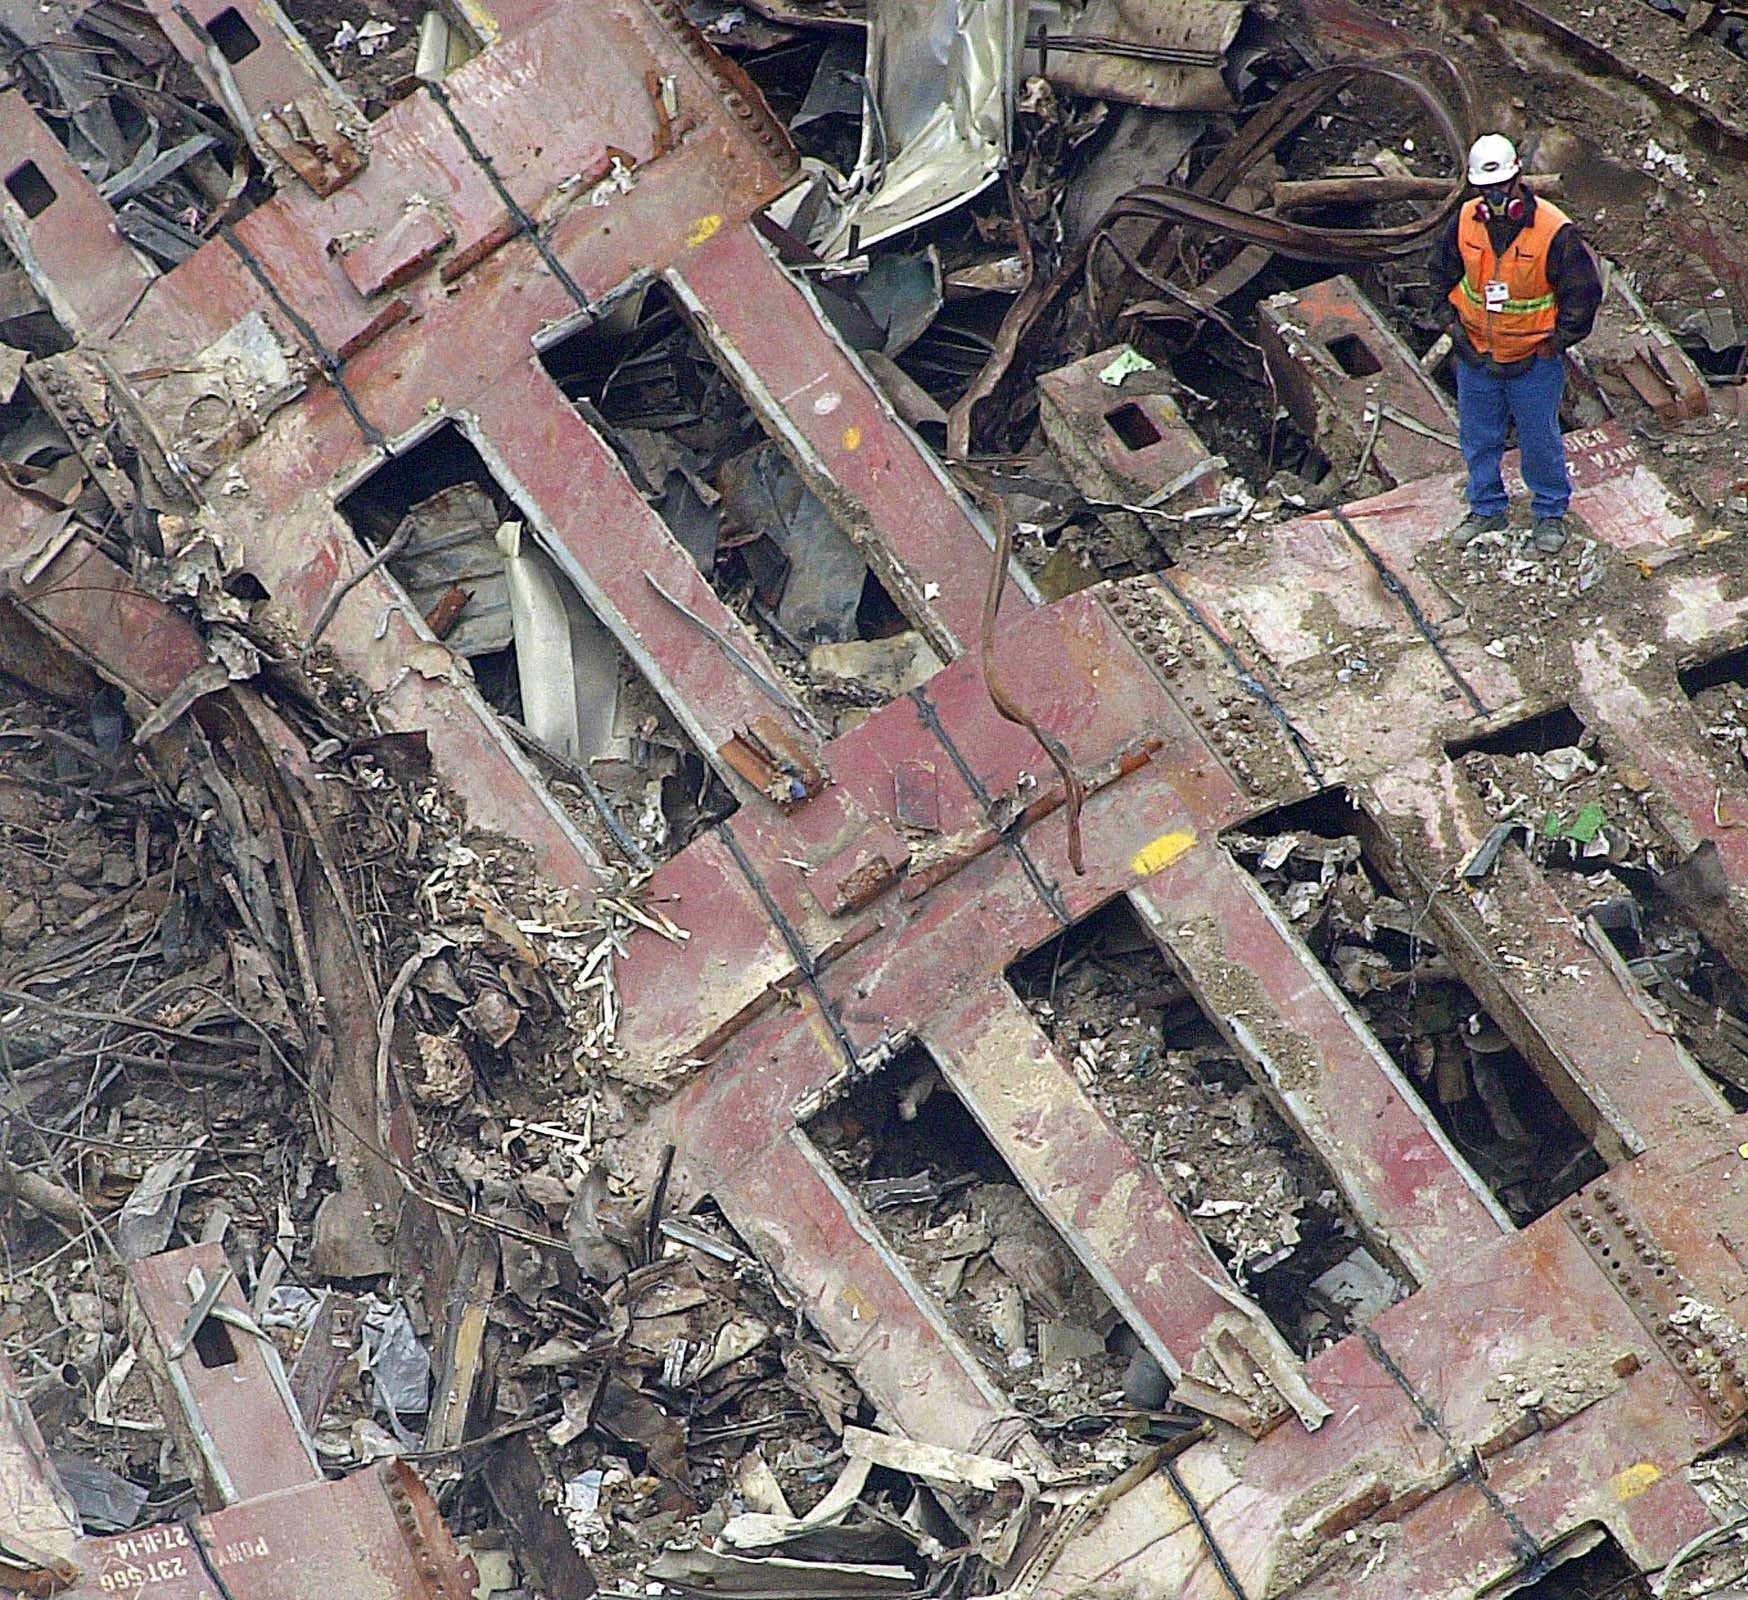 A rescue worker stands on a piece of steel where the World Trade Center once stood in New York, Thursday, Sept. 27, 2001. (AP Photo/Ed Betz) (JM DM).